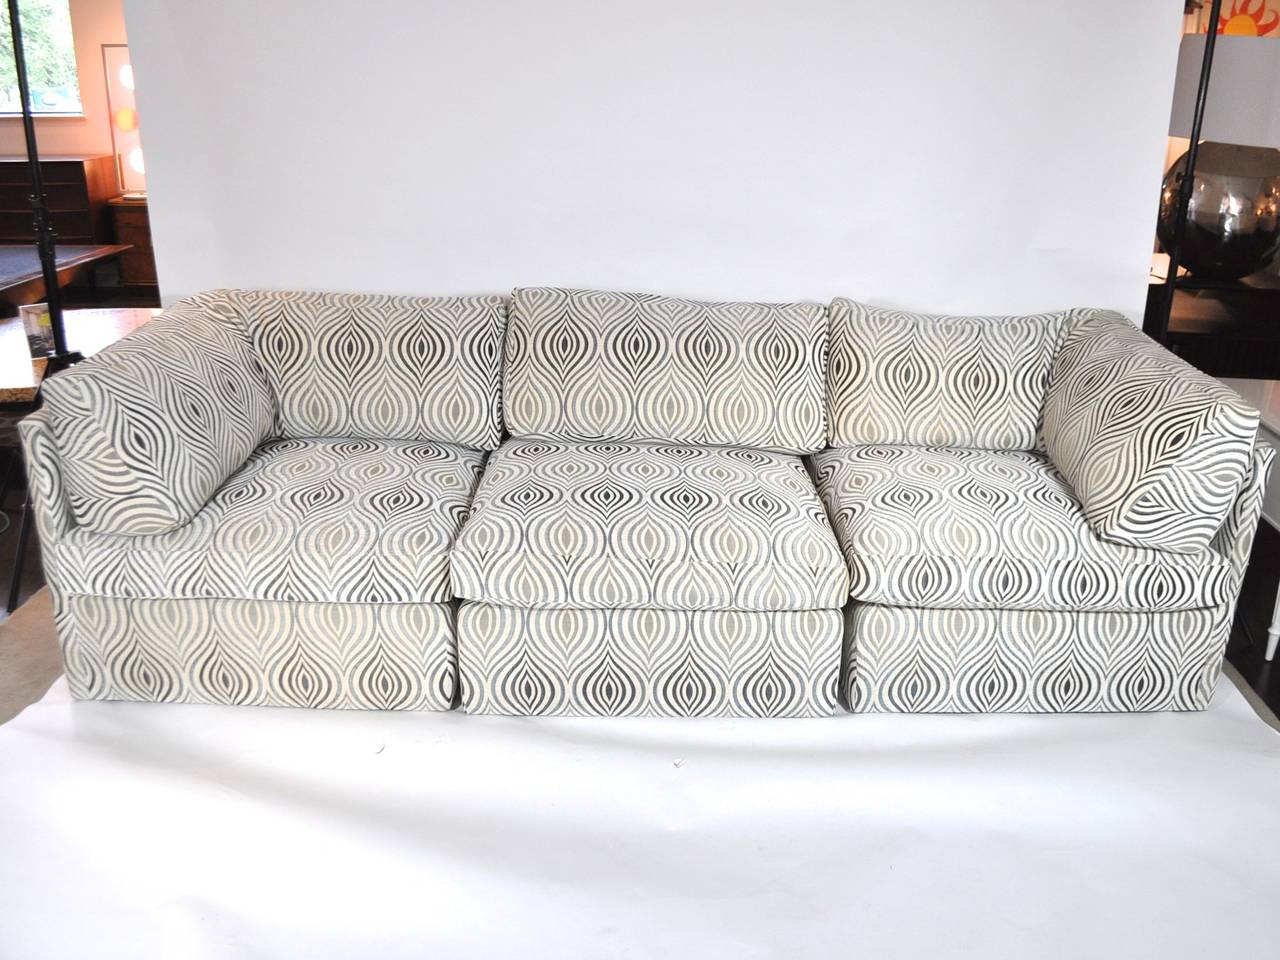 This whimsical sectional by Milo Baughman has the comfort of a modern sofa matched with the purposeful design aesthetic of the mid-century. The pieces separate for versitle seating. The 